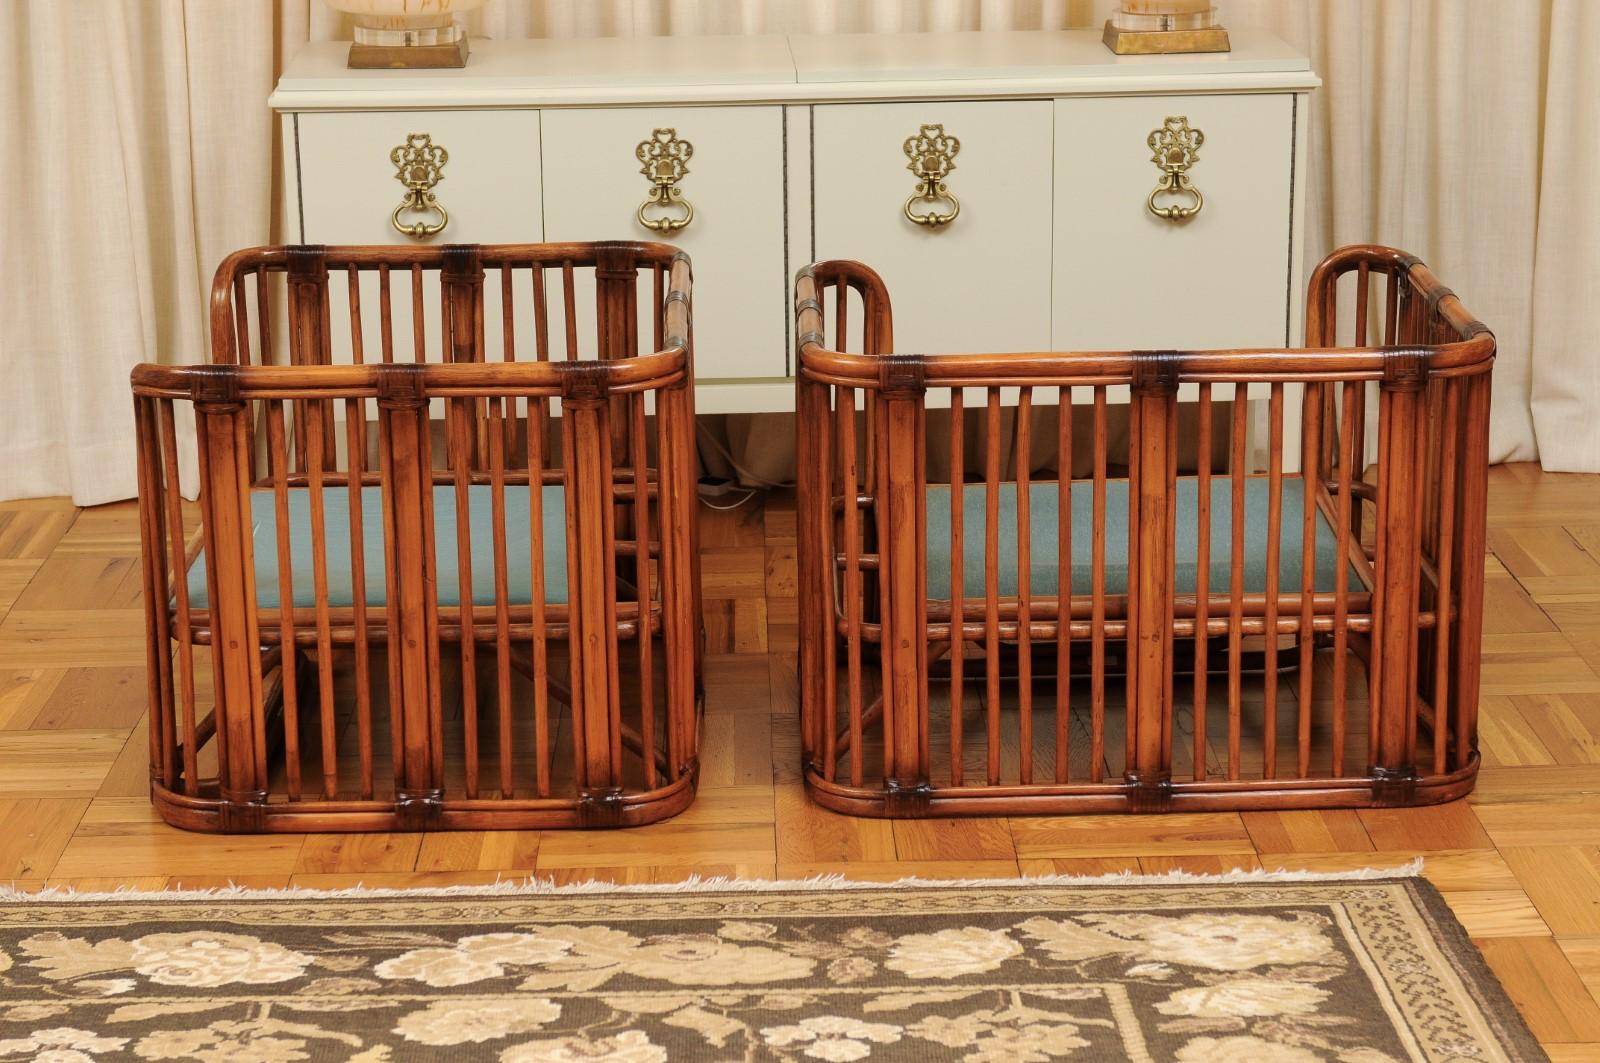 Incredible Pair of Large Scale Rattan Cube Loungers by Brown Jordan, circa 1980 For Sale 4